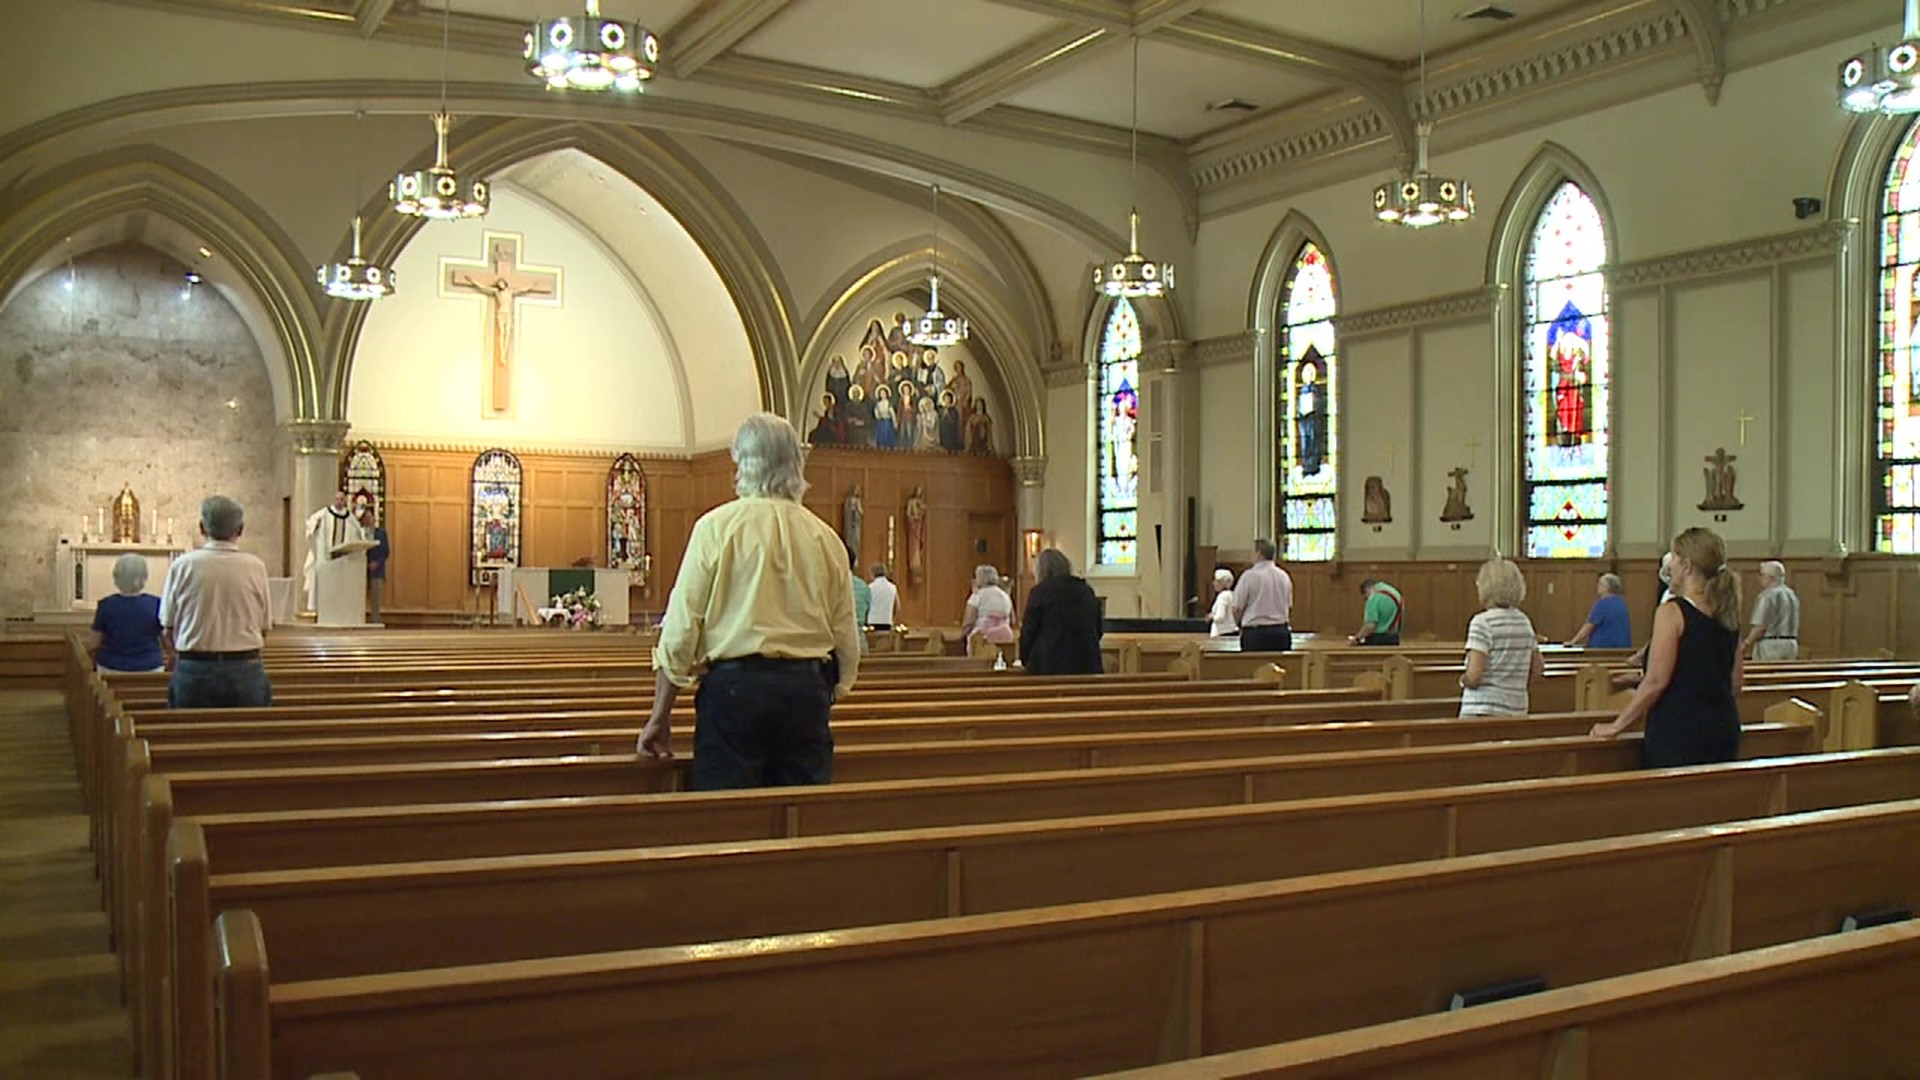 The Diocese of Scranton has announced that the Sunday mass obligation will be restored on August 15.